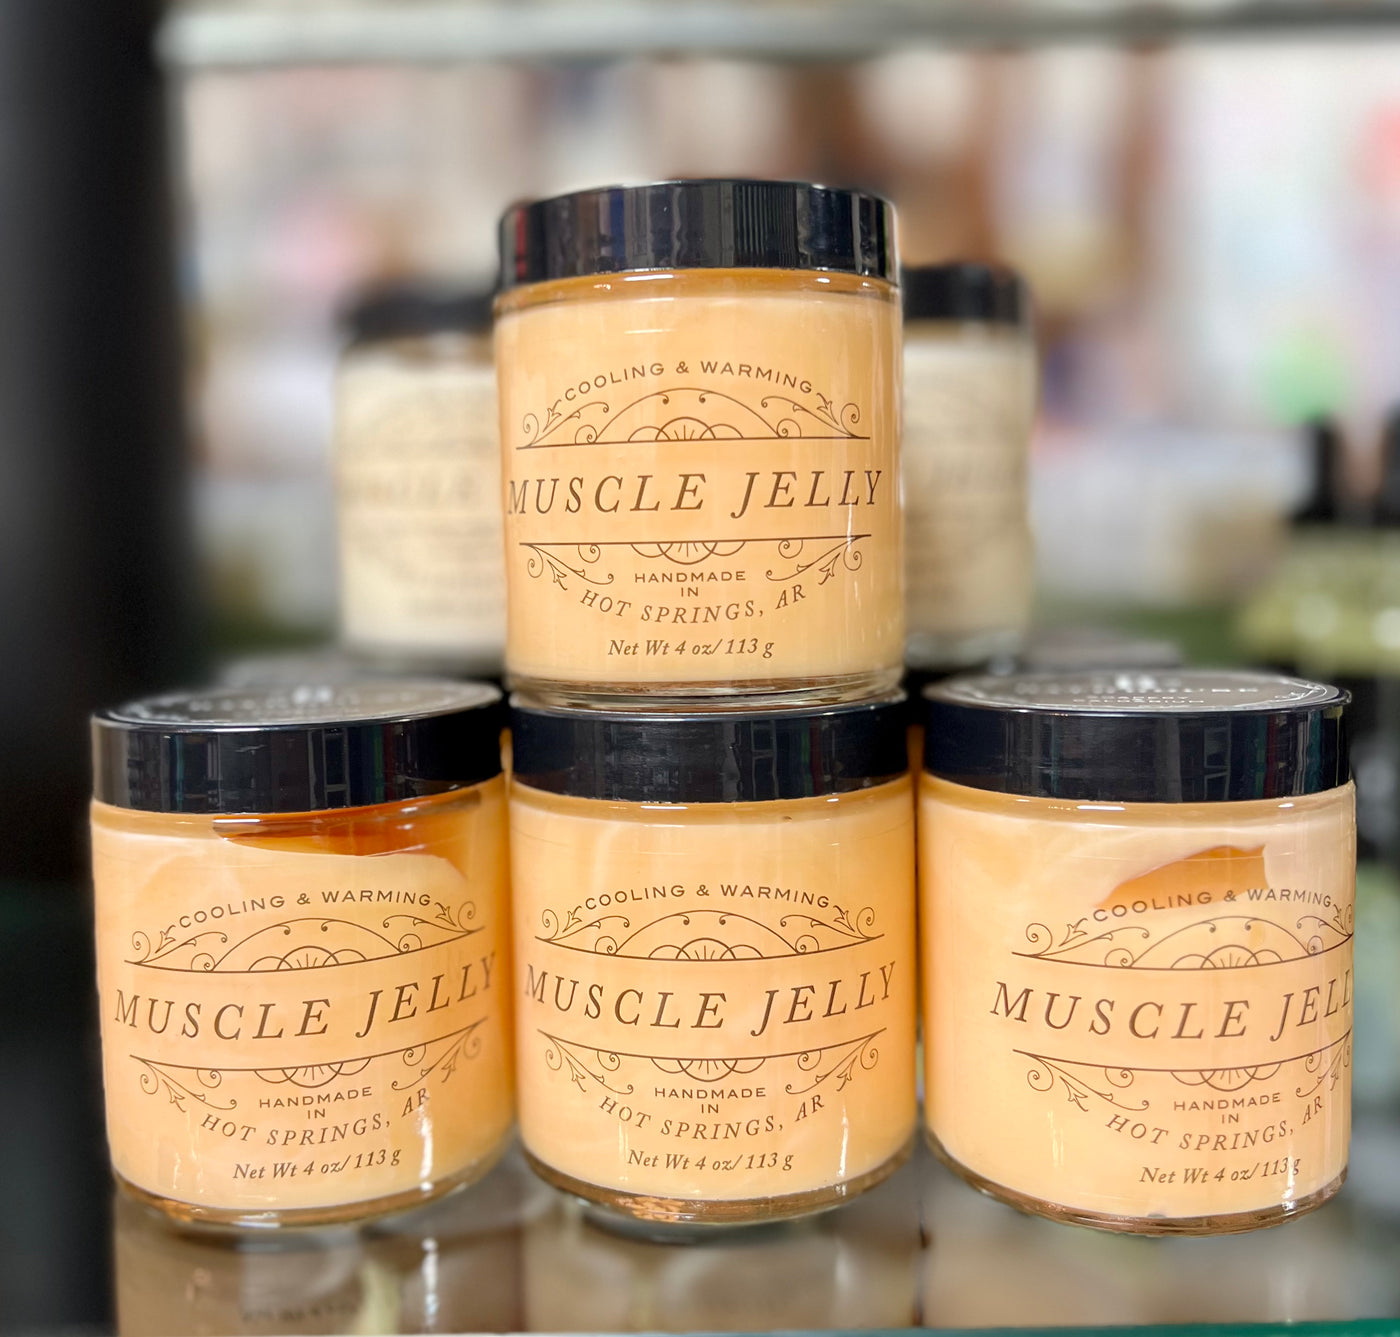 Bathhouse Soapery Muscle Jelly-Beauty & Wellness-Bathhouse Soapery-Market Street Nest, Fashionable Clothing, Shoes and Home Décor Located in Mabank, TX